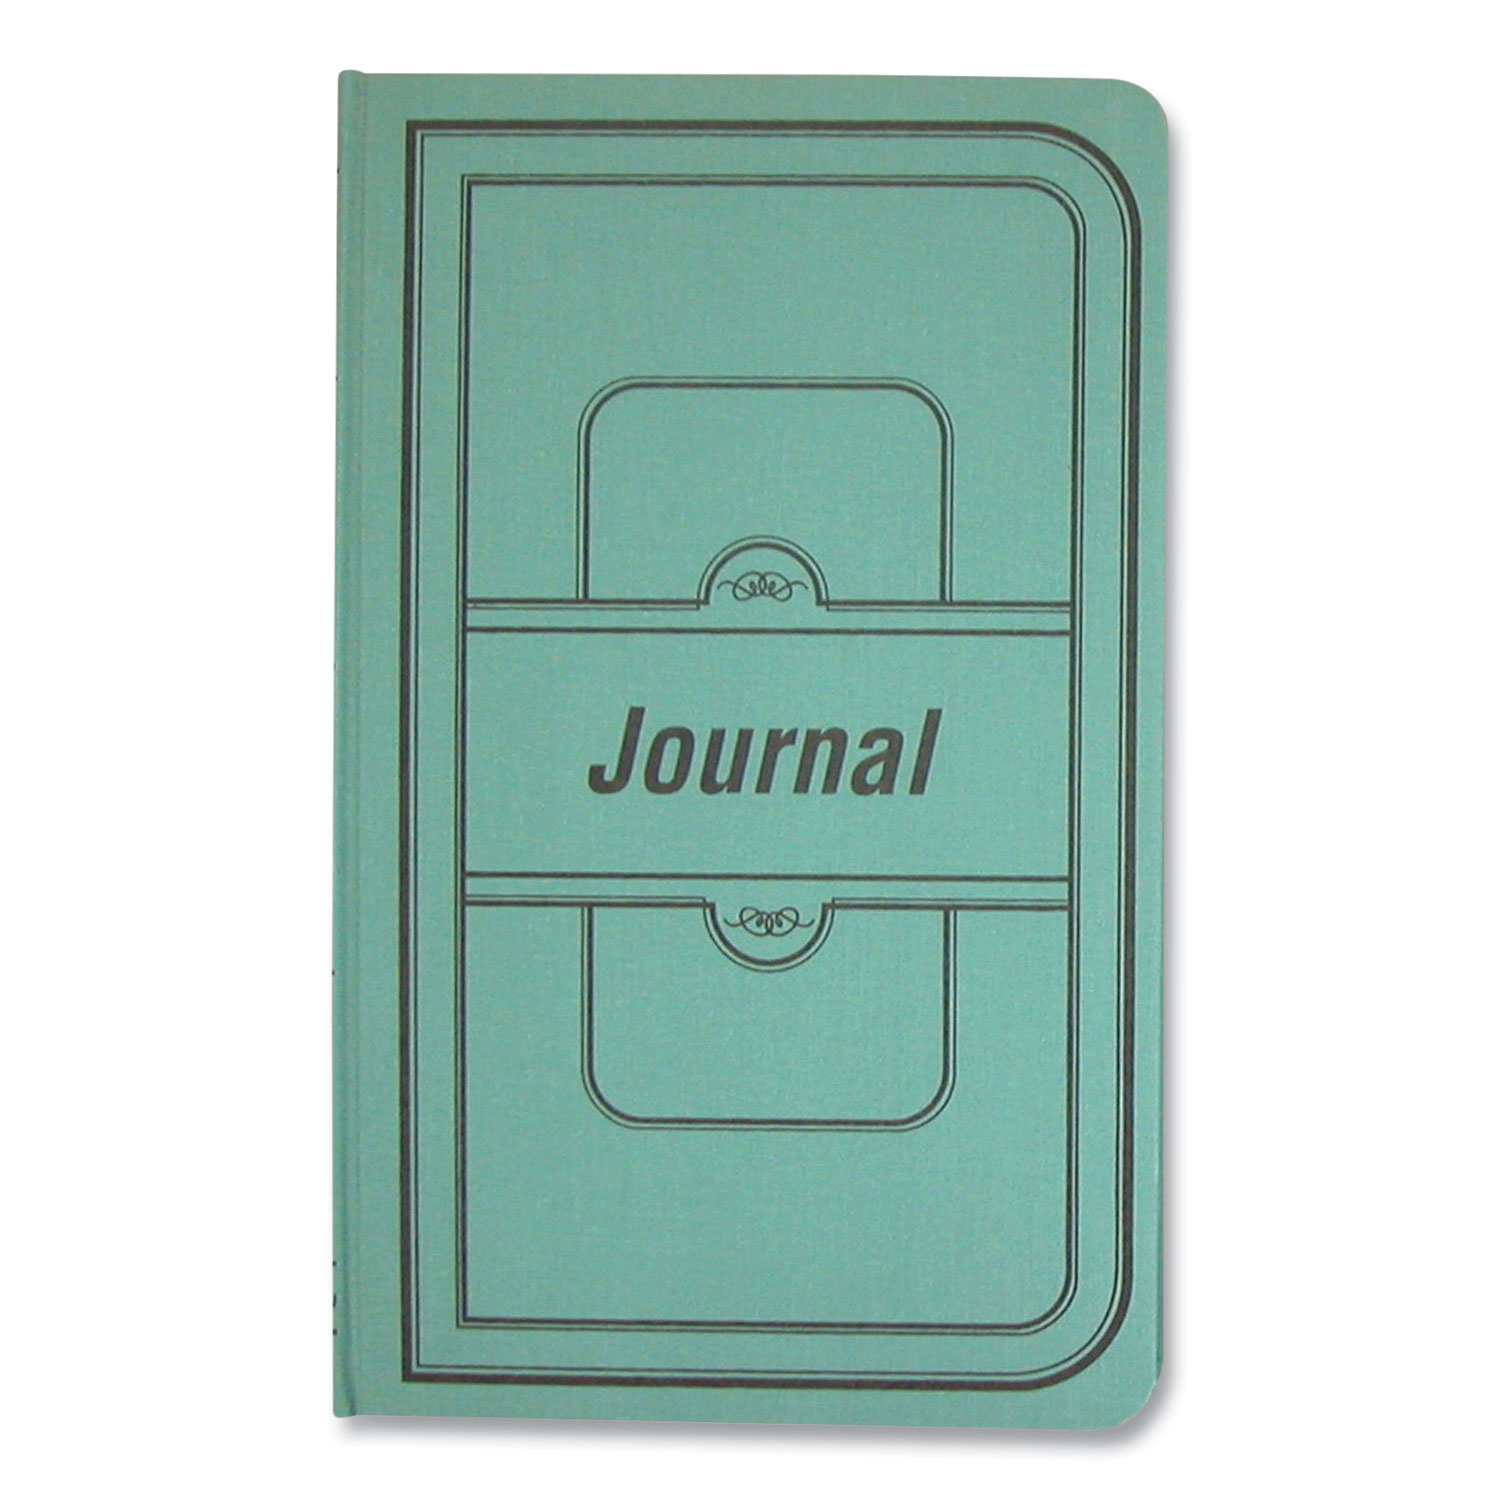  National A66500J Tuff Series Accounting Journal, Green Cover, 7.25 x 12.13, 500 White Pages (RED807343) 